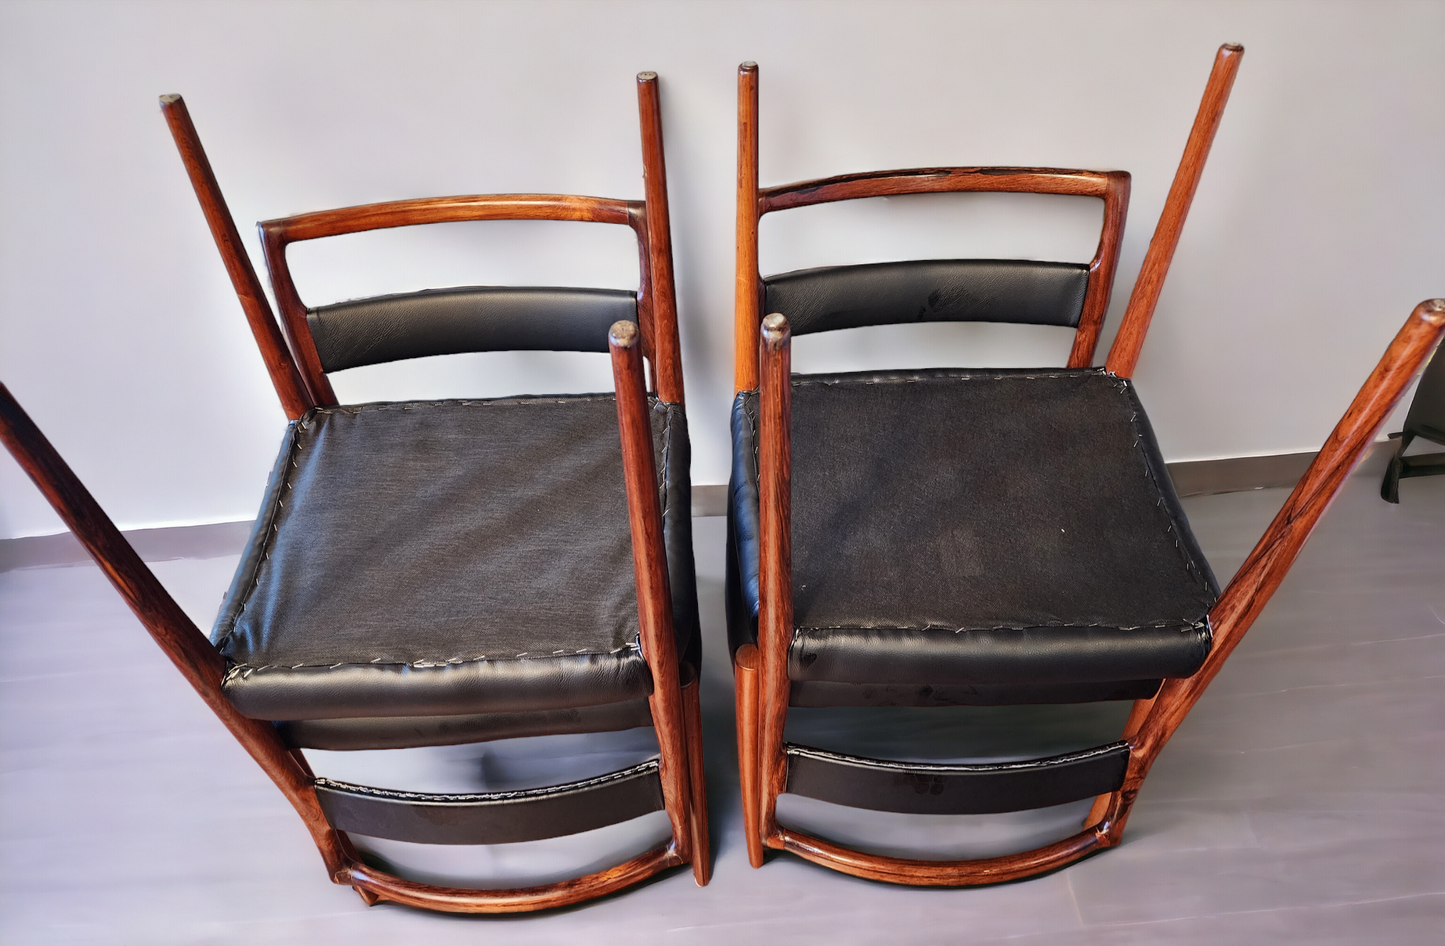 4 REFINISHED REUPHOLSTERED Danish Mid Century Modern Rosewood Chairs by Kai Kristiansen